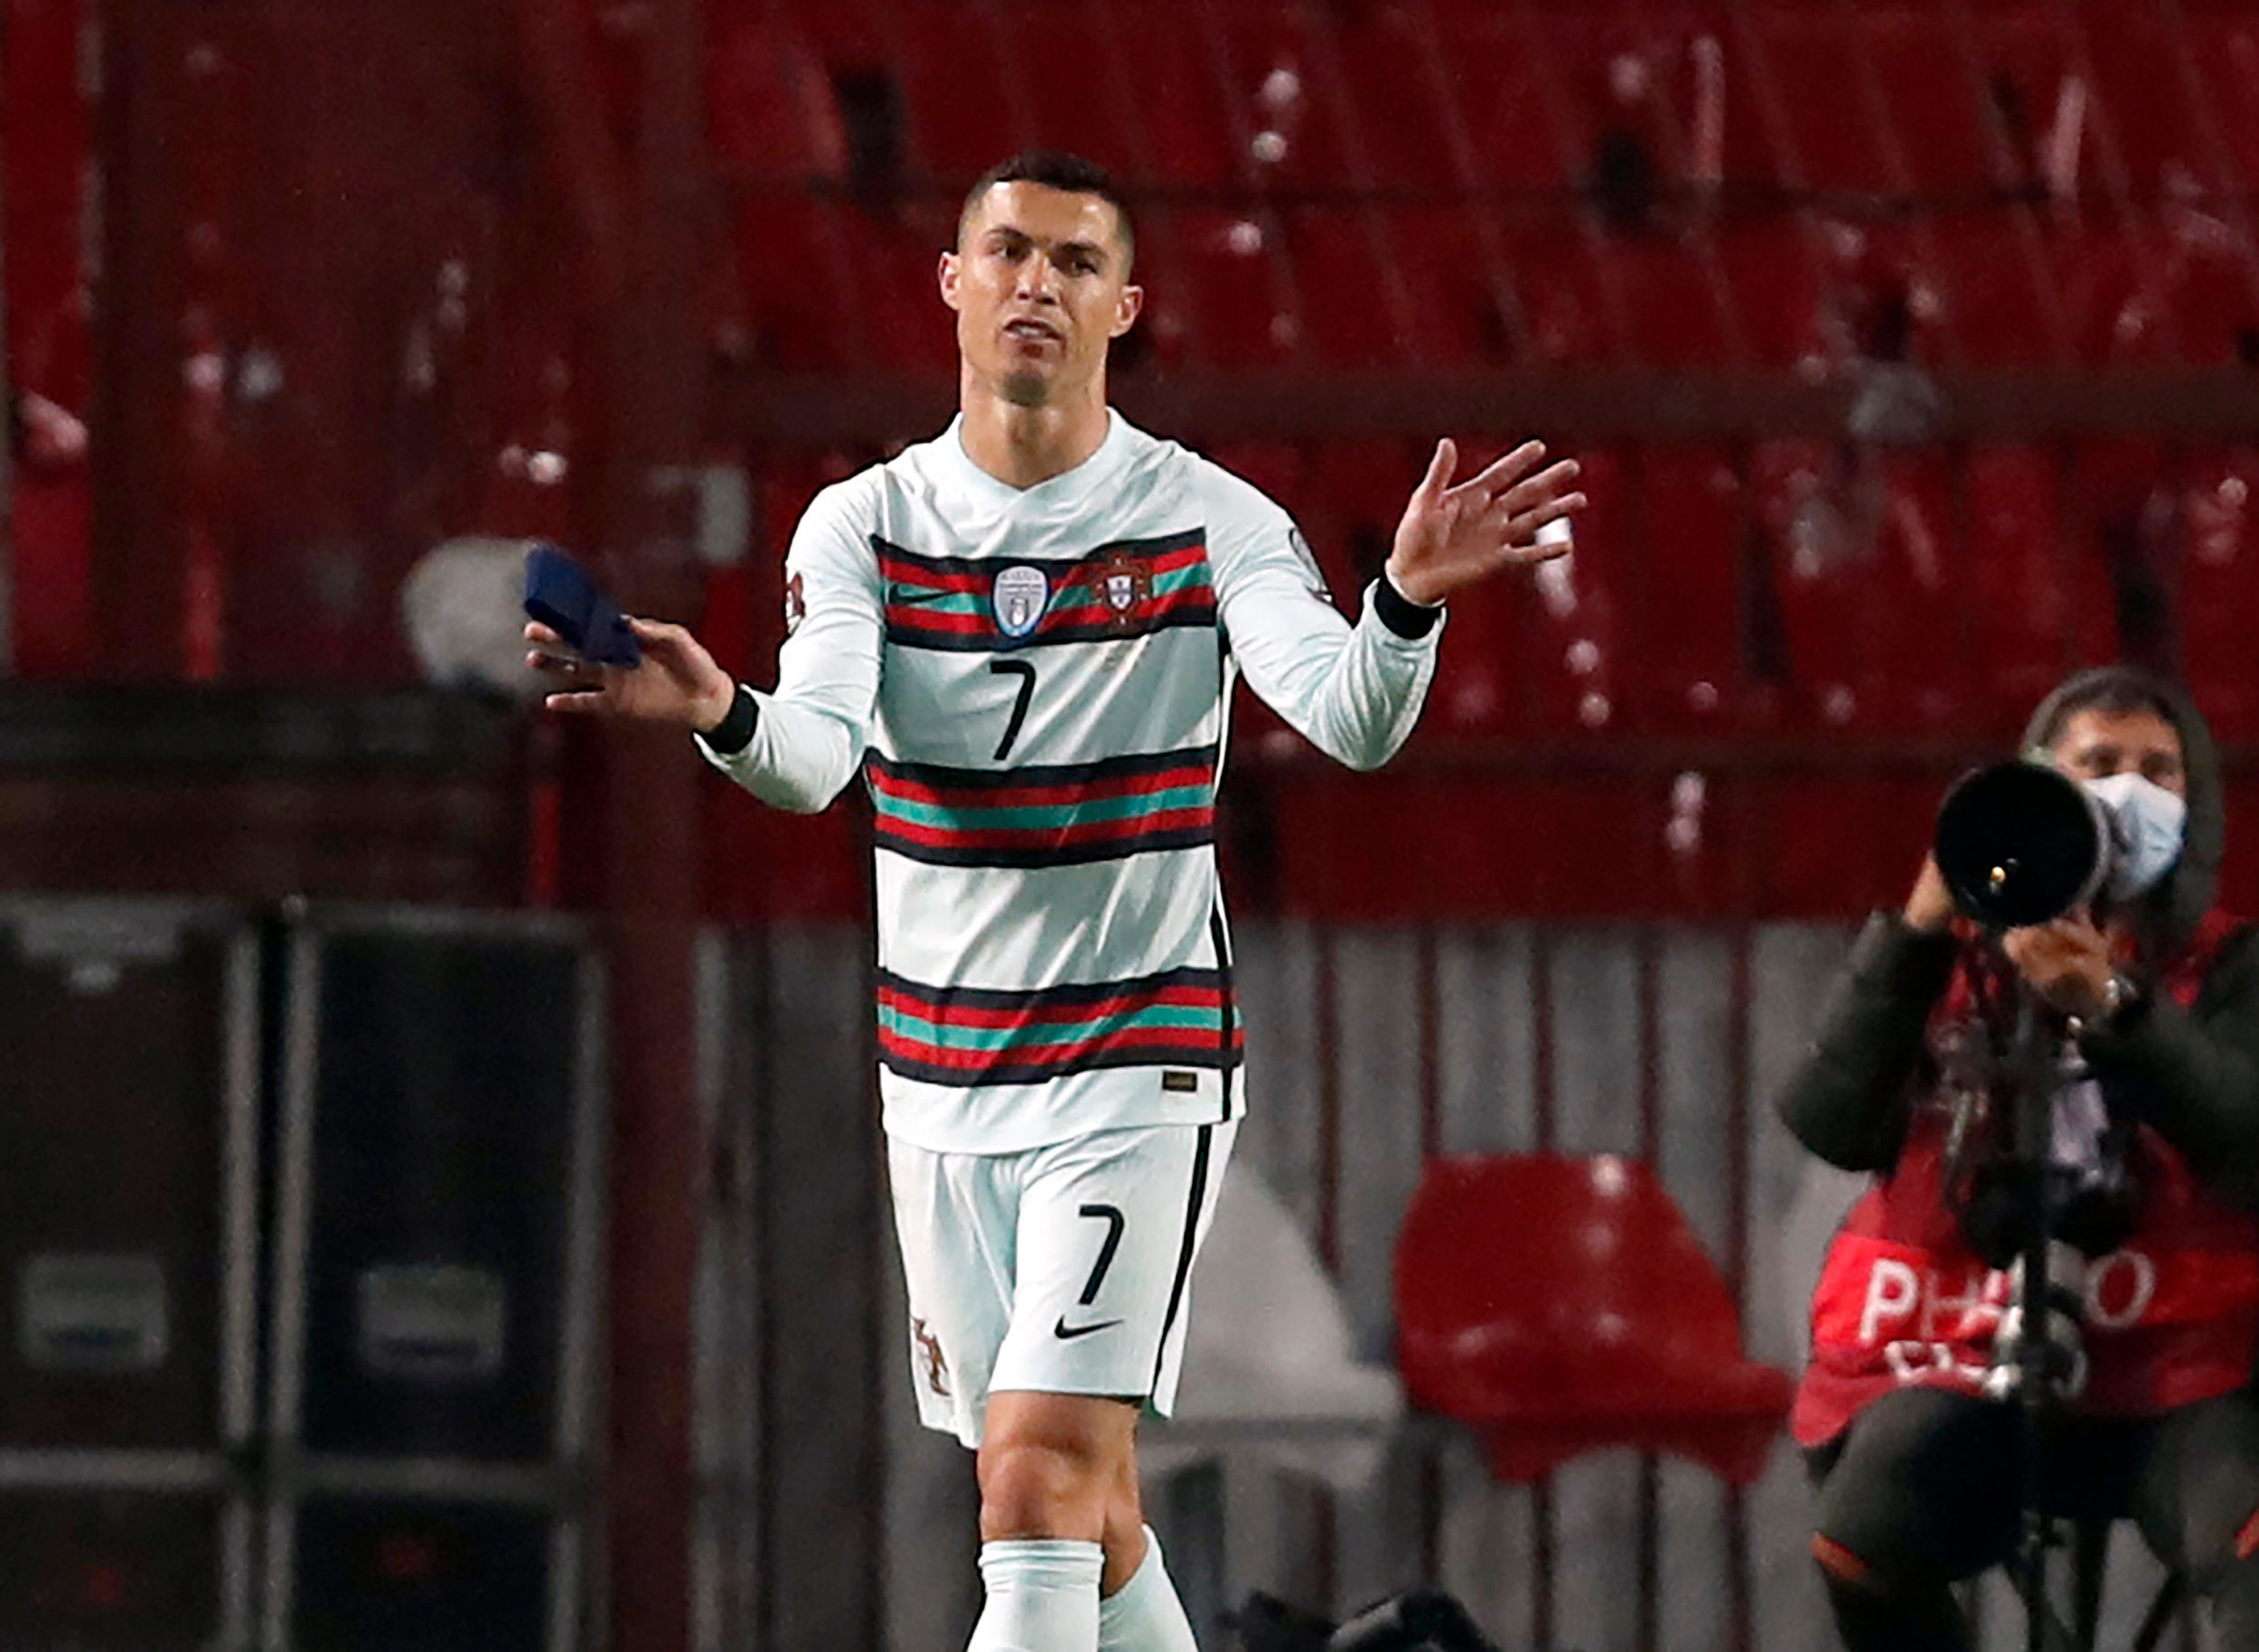 Did Cristiano Ronaldo spill Coca-Cola shares? Maybe not